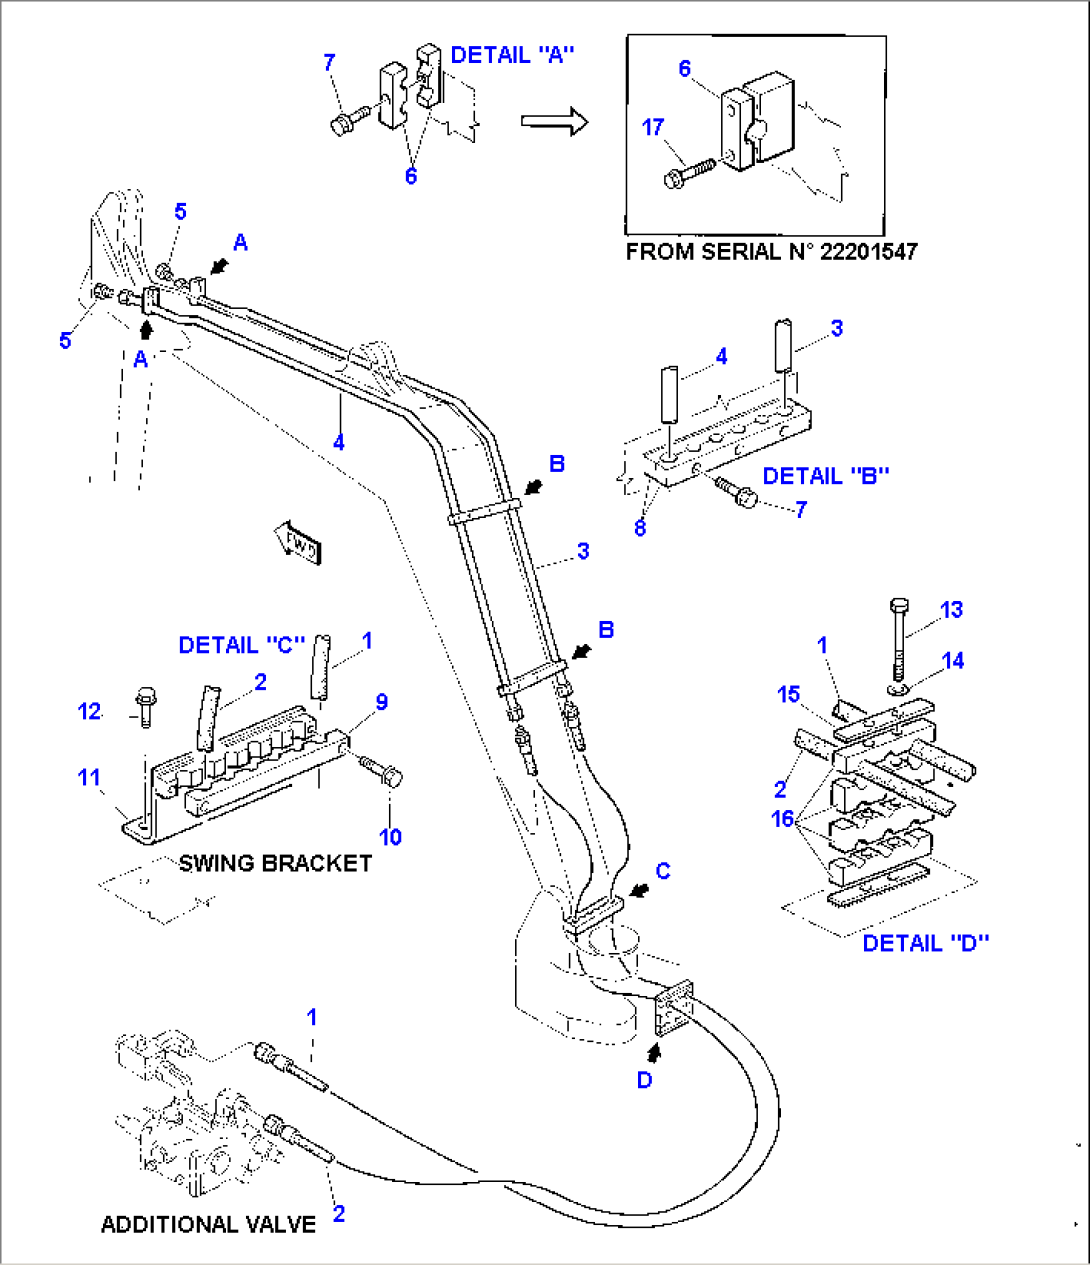 HYDRAULIC PIPING FOR ATTACHMENT (2nd PART)